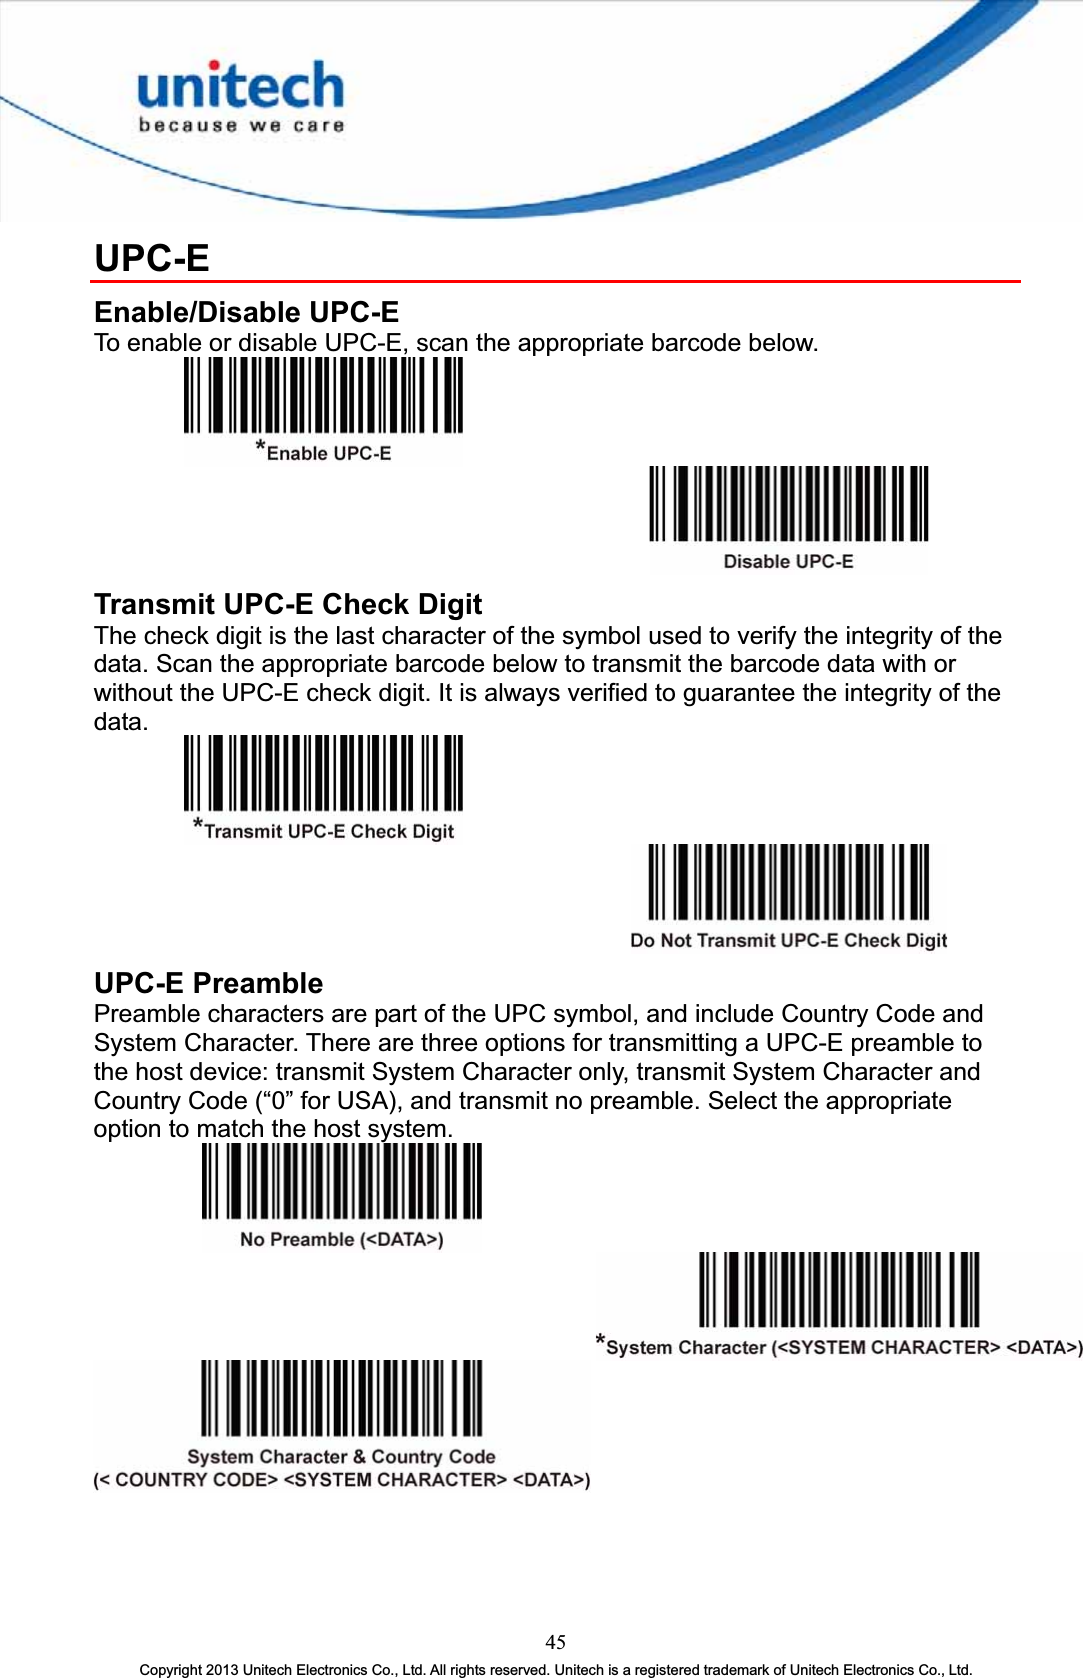 UPC-EEnable/Disable UPC-E To enable or disable UPC-E, scan the appropriate barcode below. Transmit UPC-E Check Digit The check digit is the last character of the symbol used to verify the integrity of the data. Scan the appropriate barcode below to transmit the barcode data with or without the UPC-E check digit. It is always verified to guarantee the integrity of the data. UPC-E Preamble Preamble characters are part of the UPC symbol, and include Country Code and System Character. There are three options for transmitting a UPC-E preamble to the host device: transmit System Character only, transmit System Character and Country Code (“0” for USA), and transmit no preamble. Select the appropriate option to match the host system. 45Copyright 2013 Unitech Electronics Co., Ltd. All rights reserved. Unitech is a registered trademark of Unitech Electronics Co., Ltd. 